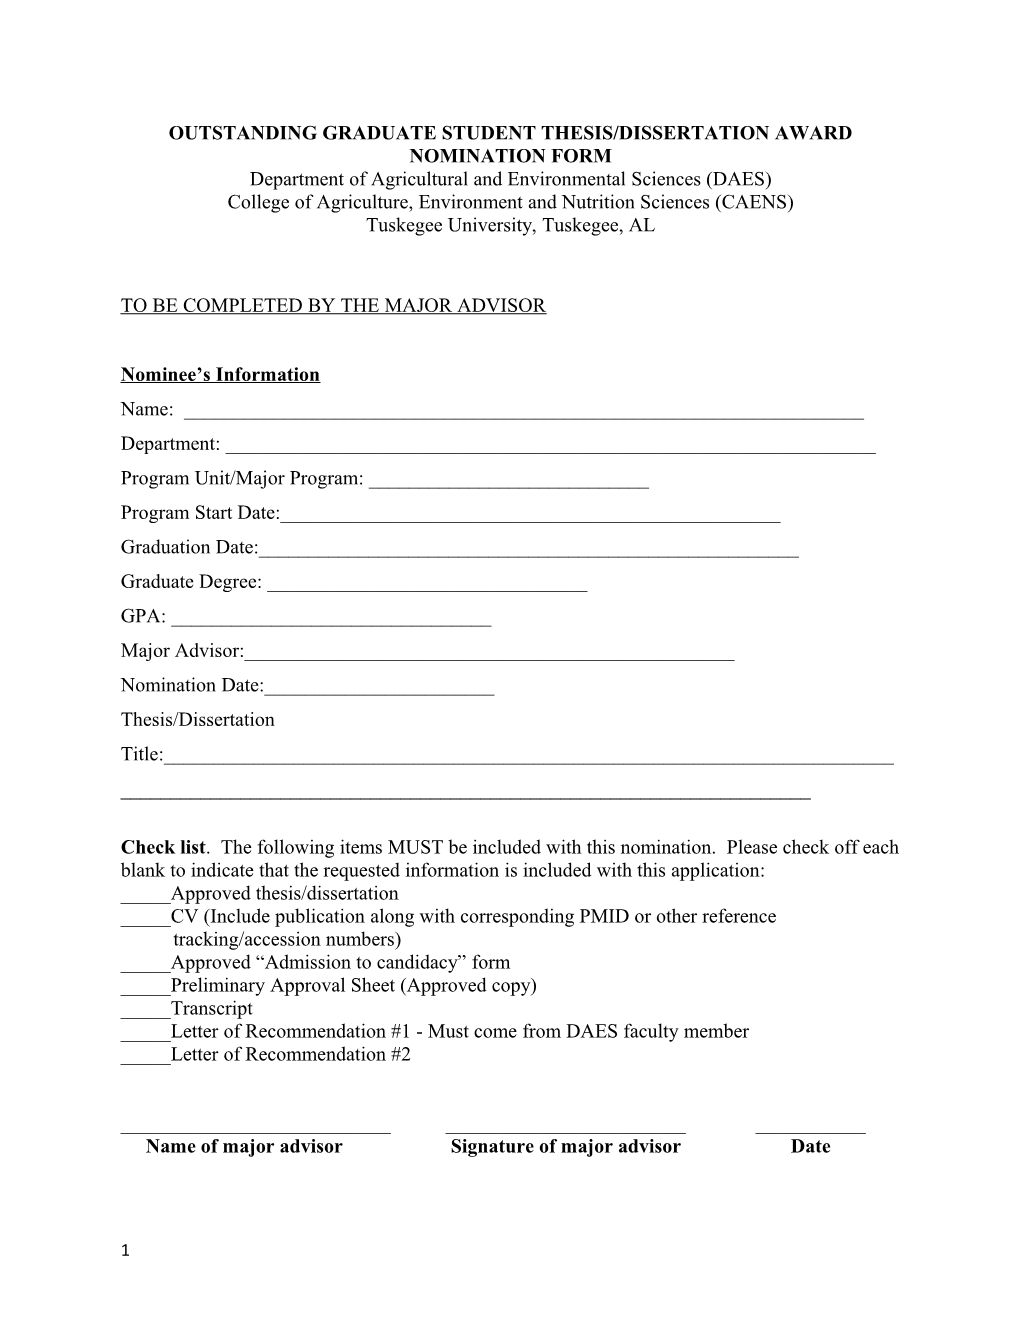 Outstanding Graduate Student Thesis/Dissertation Award Nomination Form